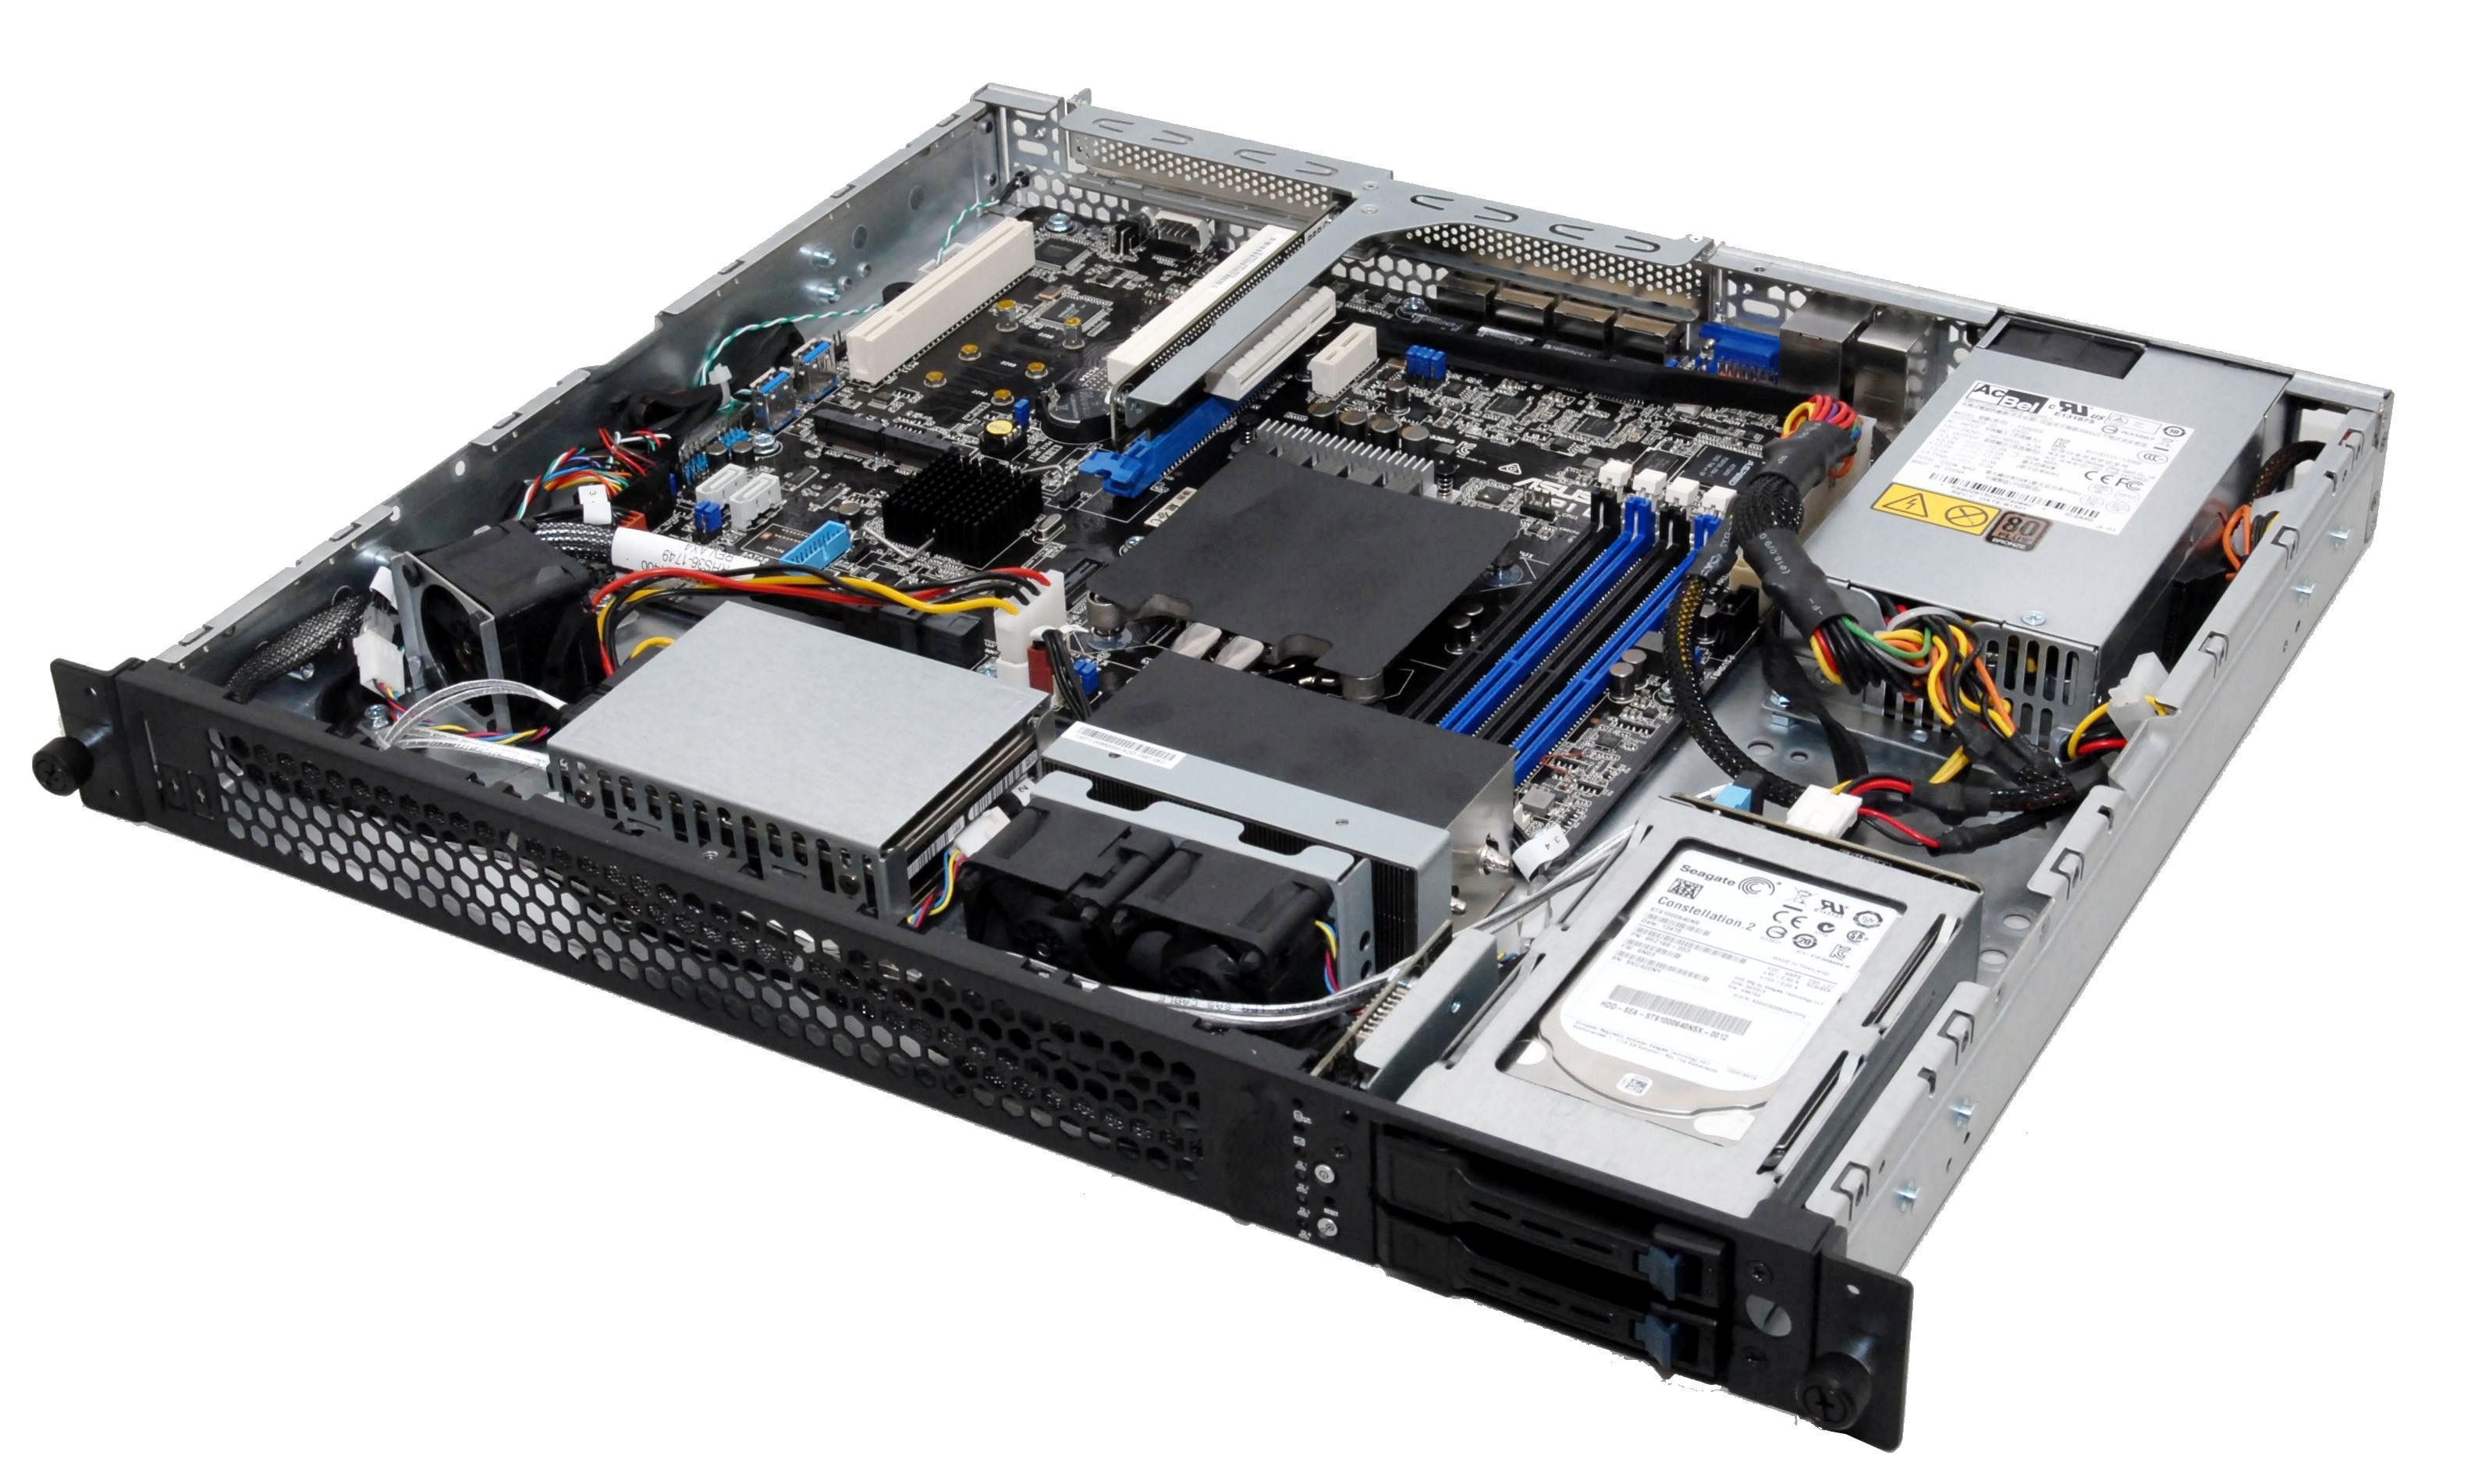 Пс 9 2. ASUS rs300-e11-rs4. ASUS rs300-e11-rs4 Rack 1u. Rs300-e11-rs4 1u. ASUS rs520-e9.